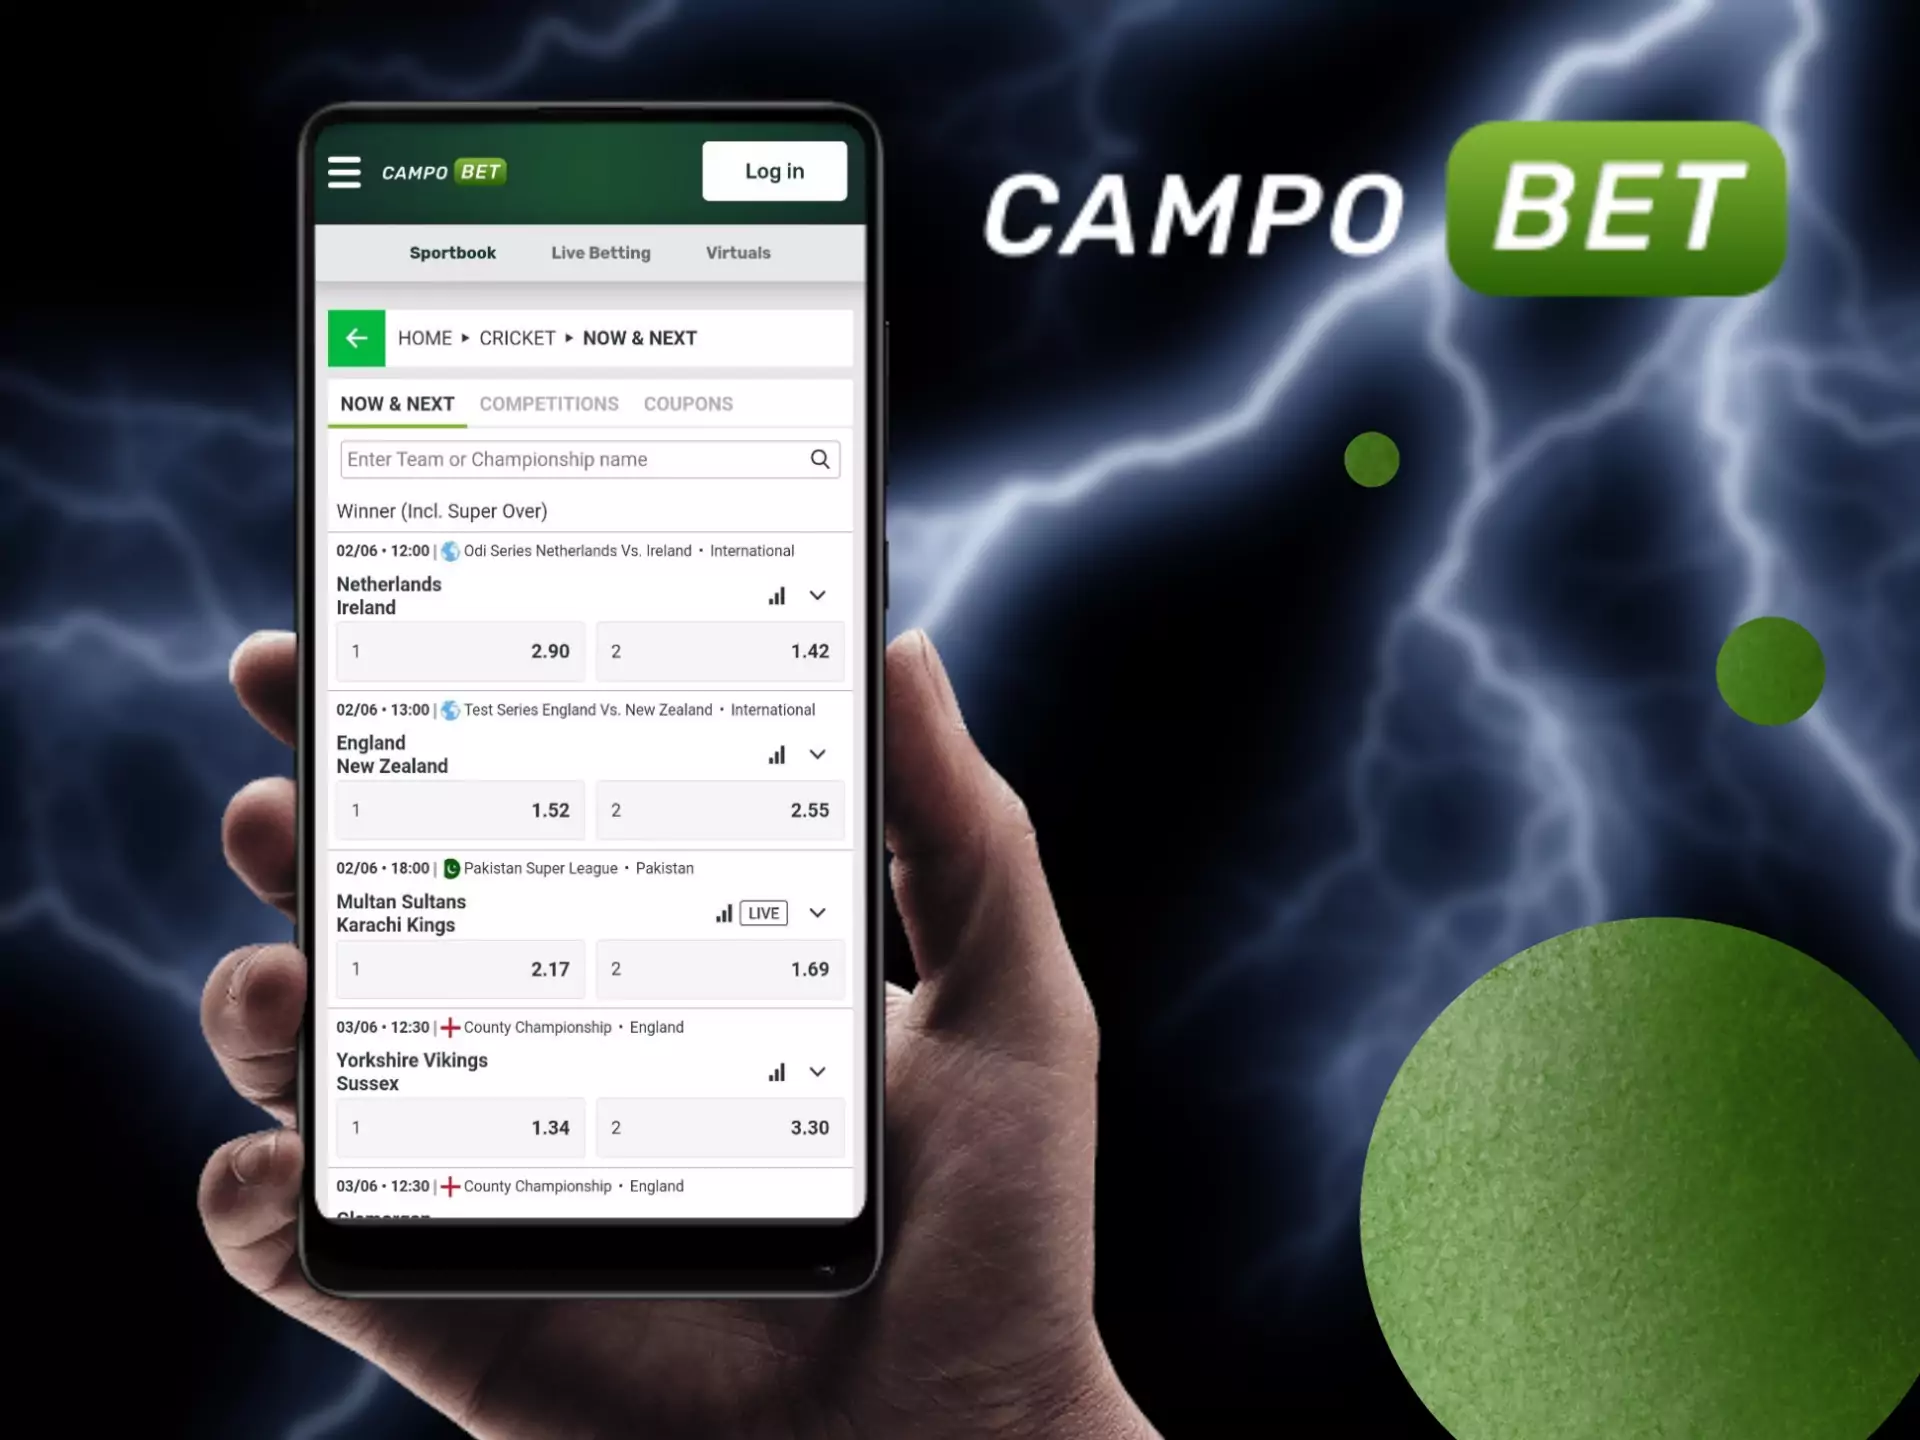 If you do not want to install any soft you can use Campobet via your mobile browser.